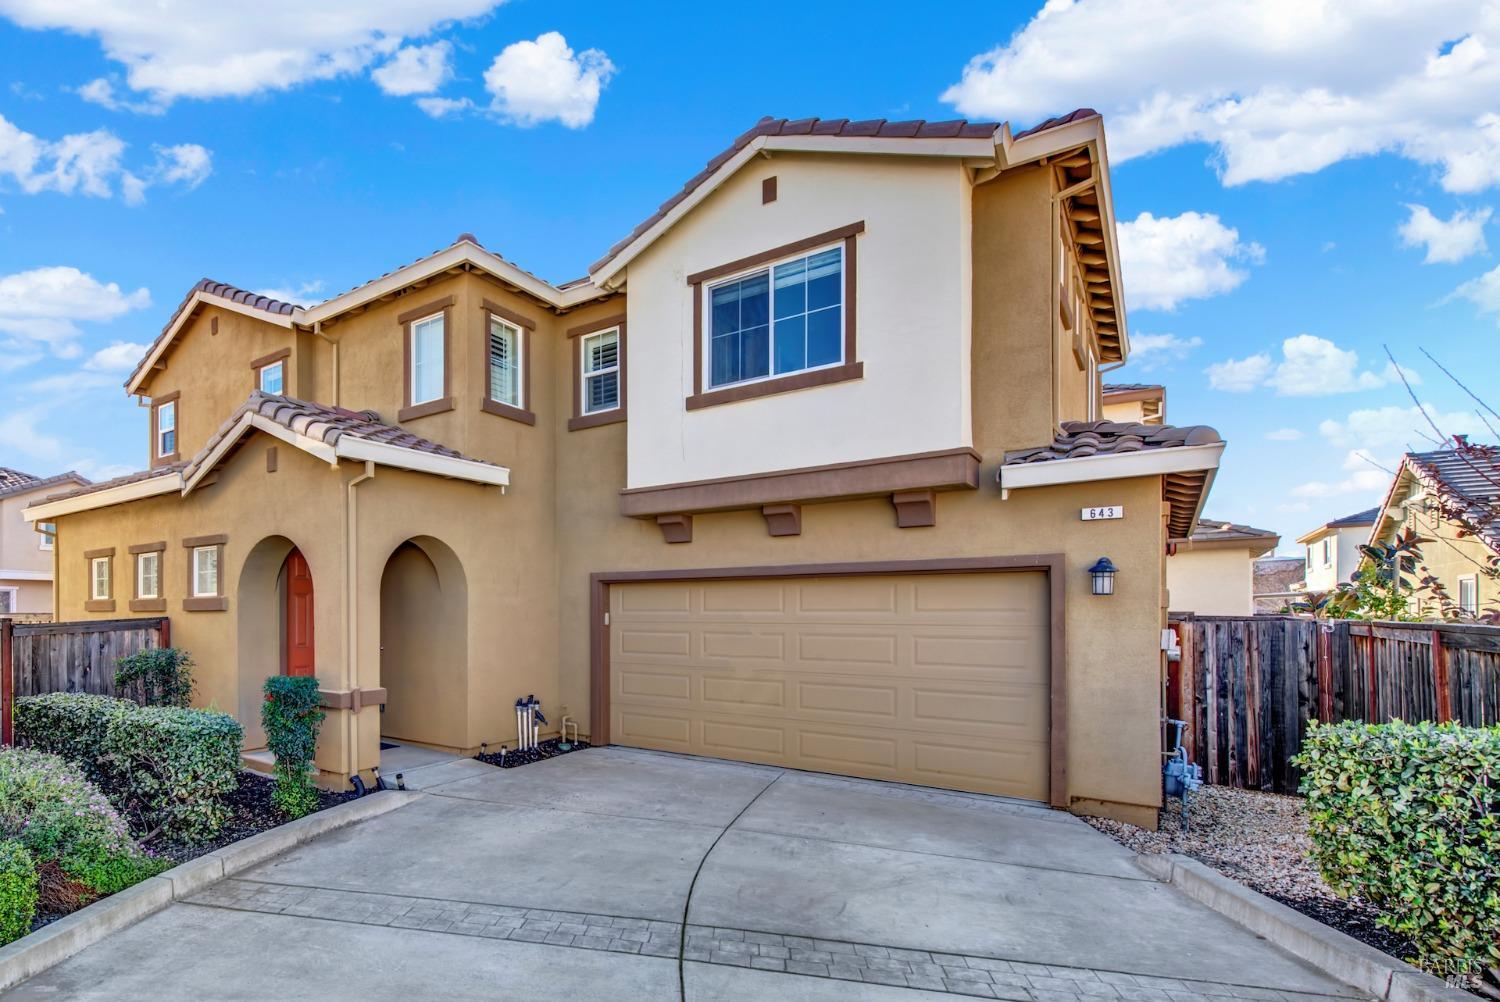 Welcome to this stunning home located in the Sanctuary Homeowners Association. This spacious 4 bedro